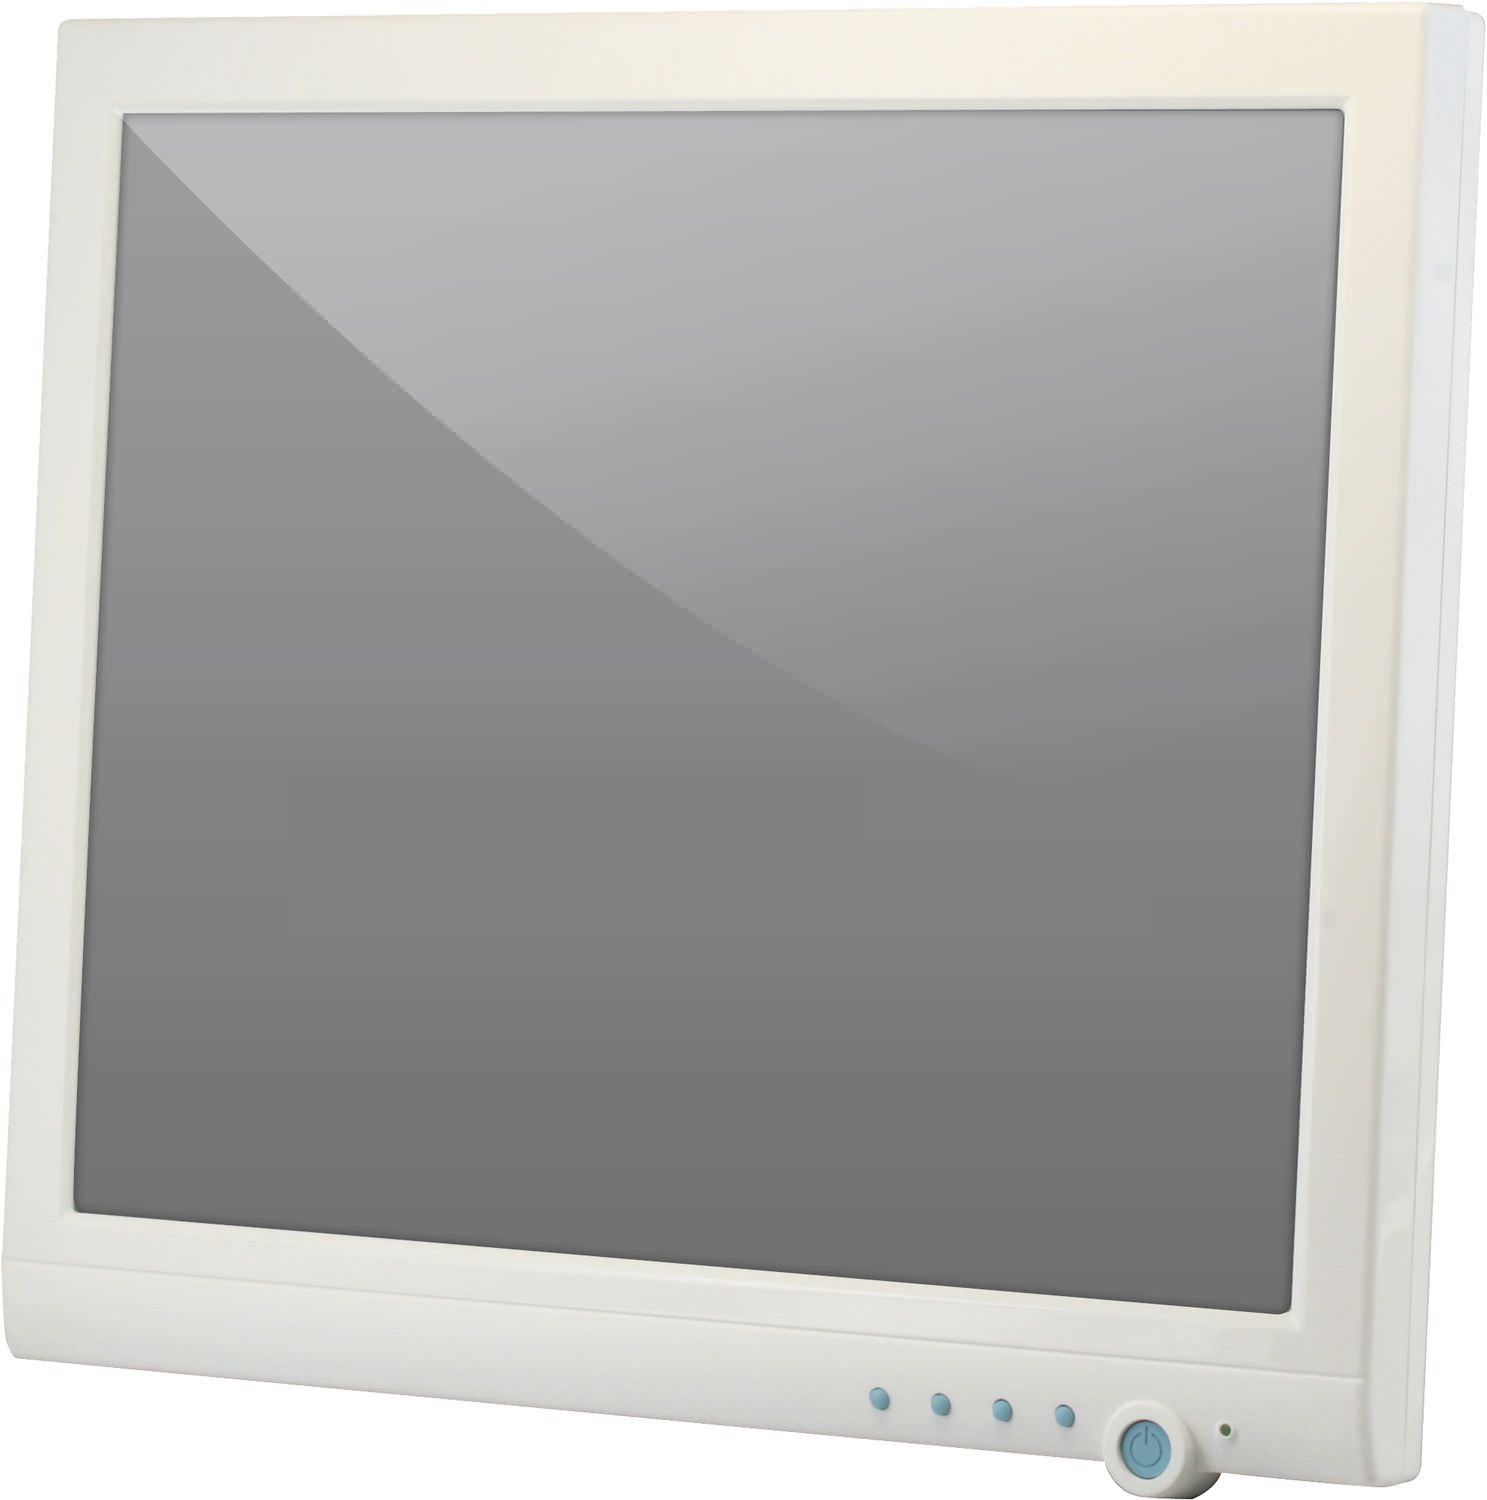 Fanless medical panel PC / with touchscreen 17", Dual Core 1.6 GHz | ONYX-1723 Onyx Healthcare Inc